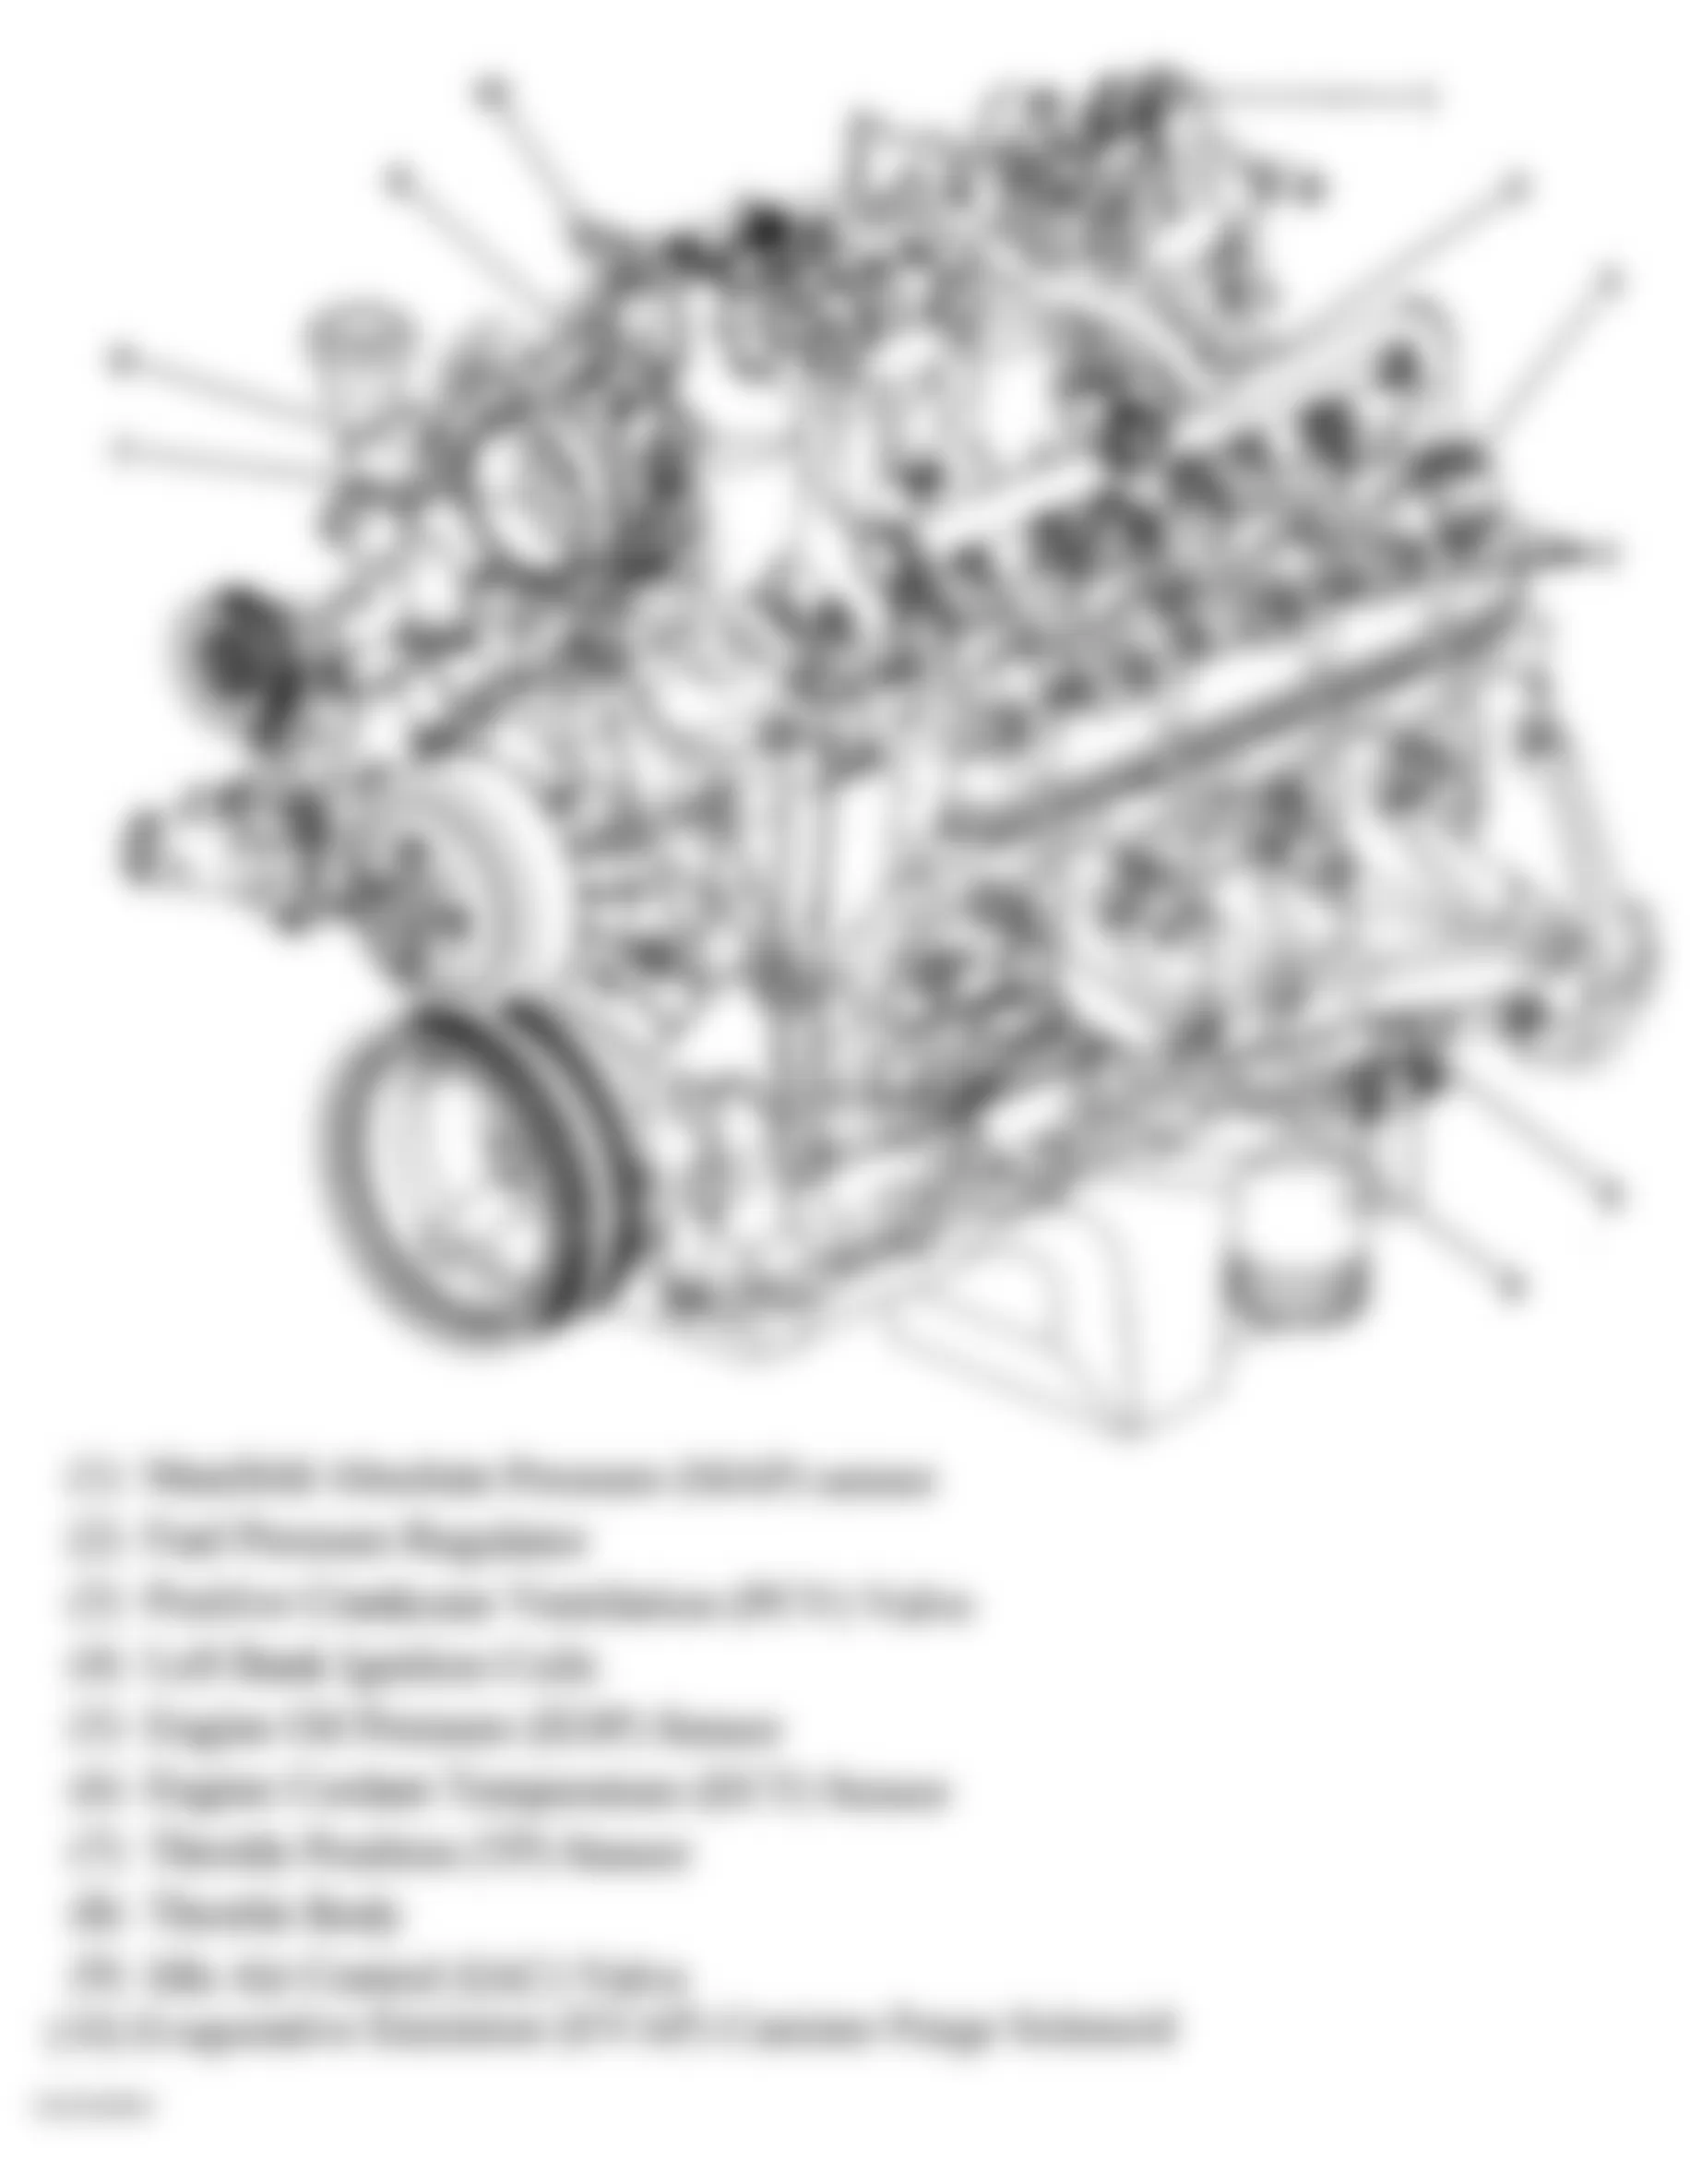 GMC Sierra 3500 2004 - Component Locations -  Left Front Of Engine (4.8L, 5.3L & 6.0L)